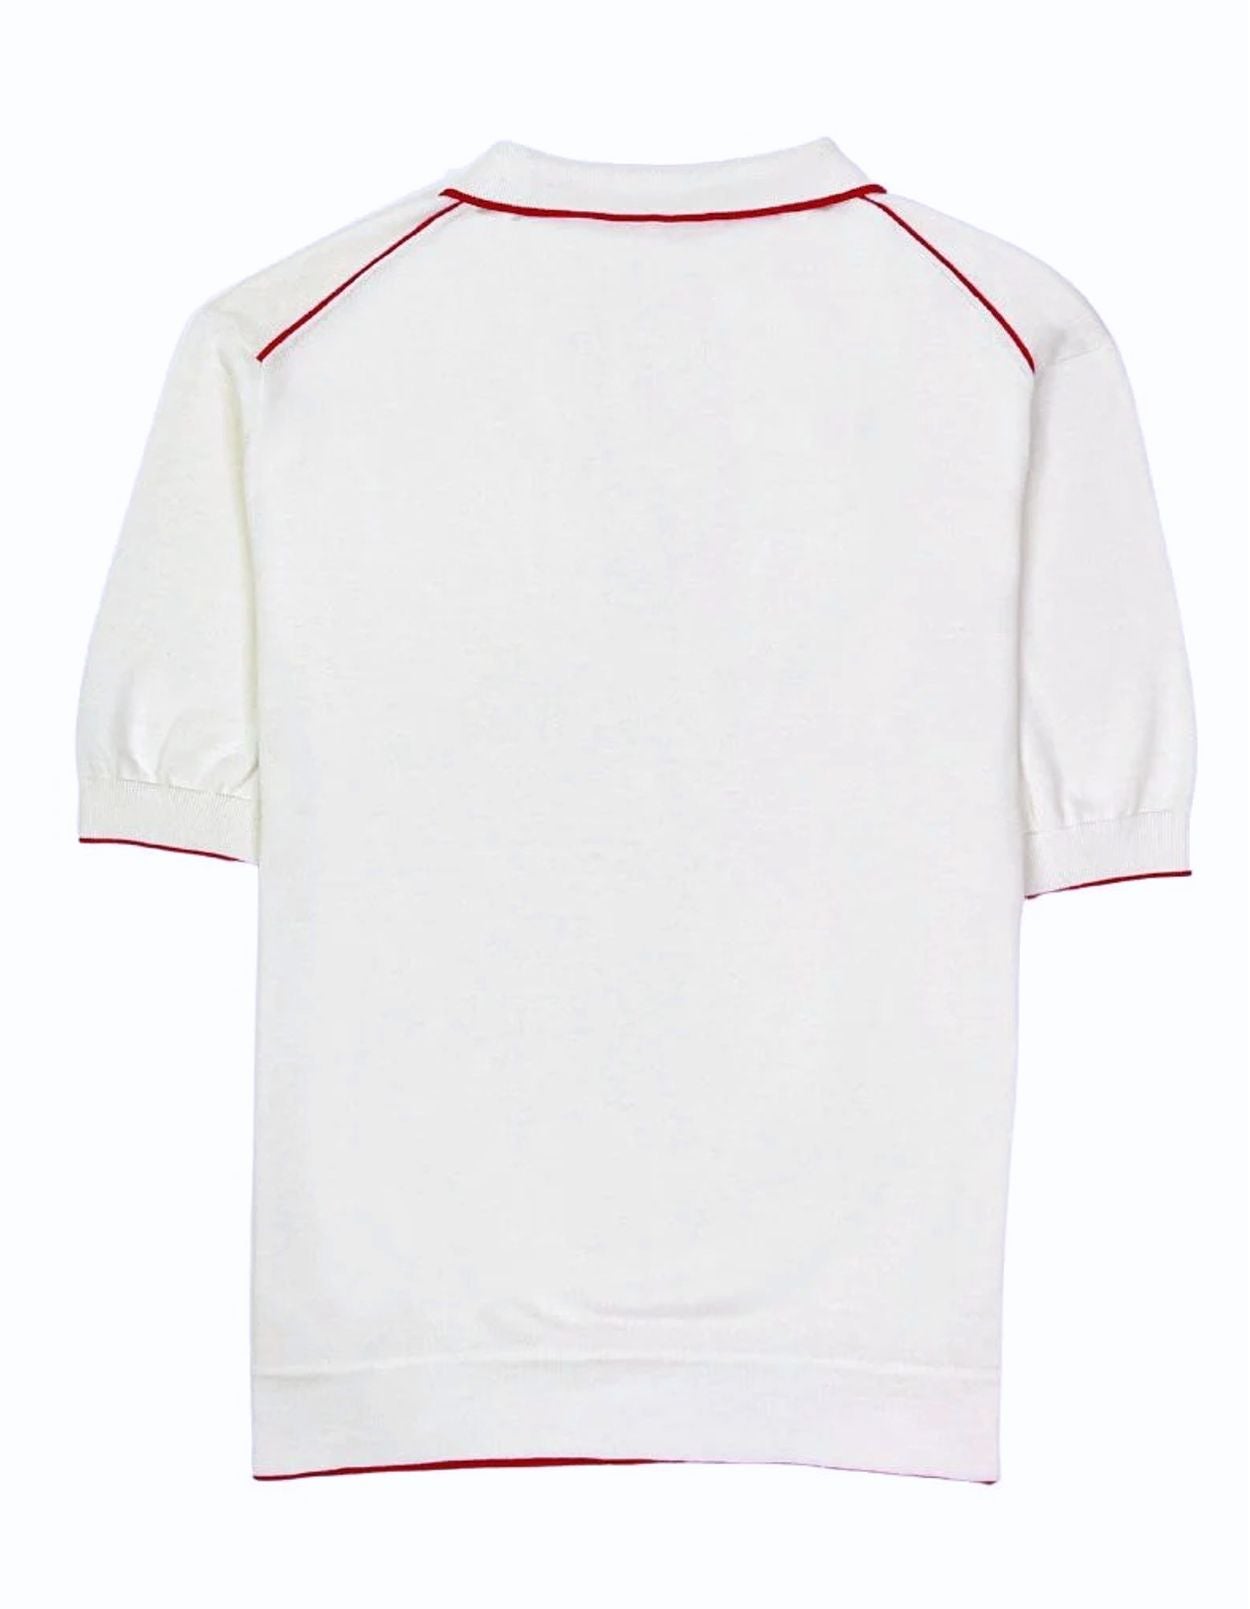 St. Gabriel Double Jersey Knit Silk and Cotton Button-Neck Polo in Off White with Red Trim by Deletto Italy